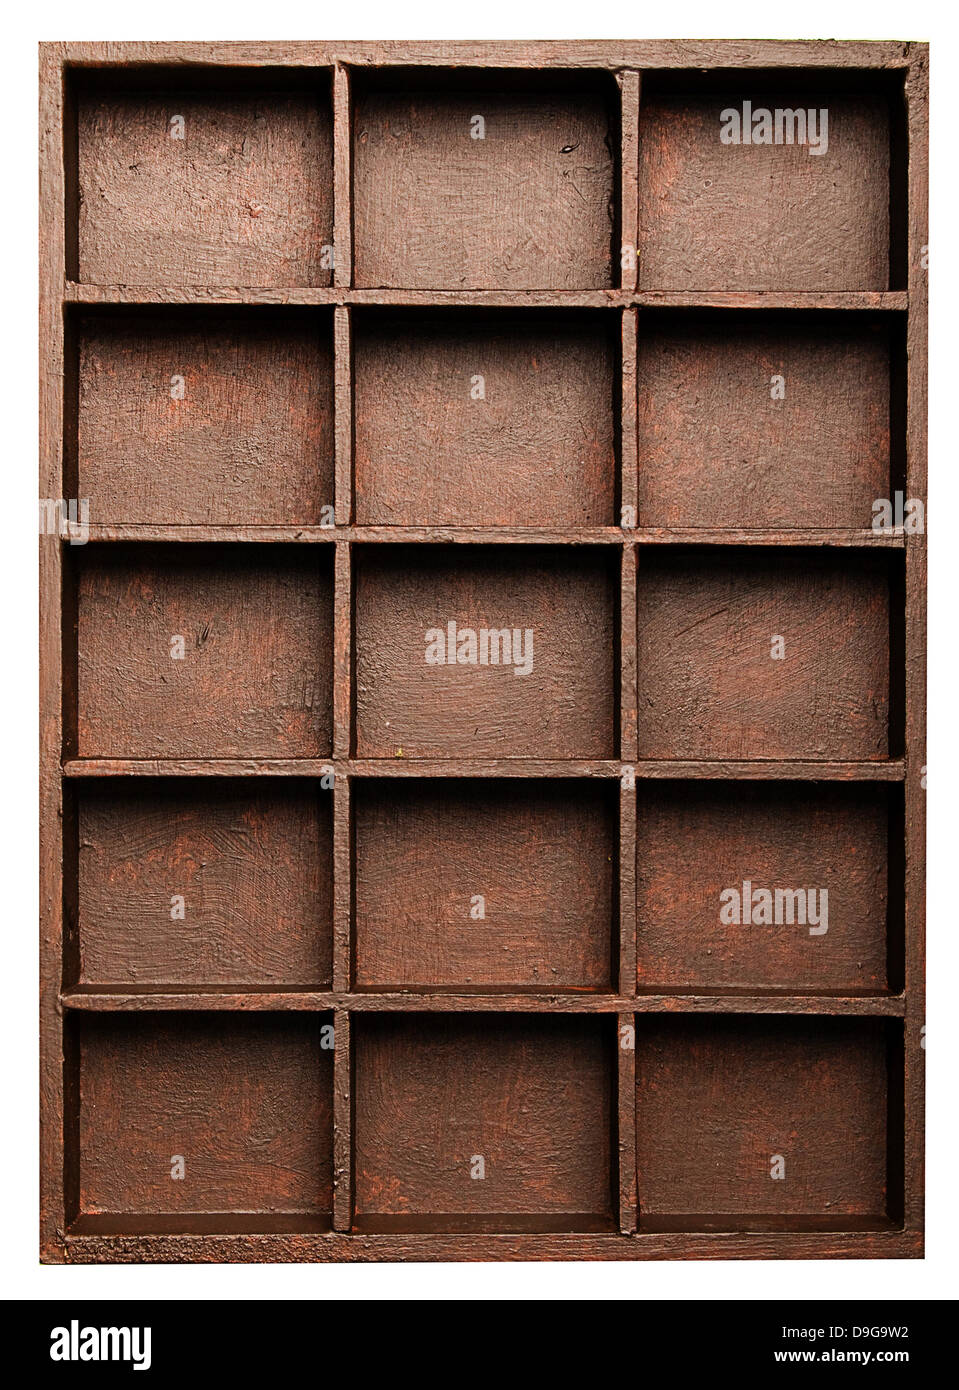 https://c8.alamy.com/comp/D9G9W2/a-wooden-box-with-compartments-D9G9W2.jpg